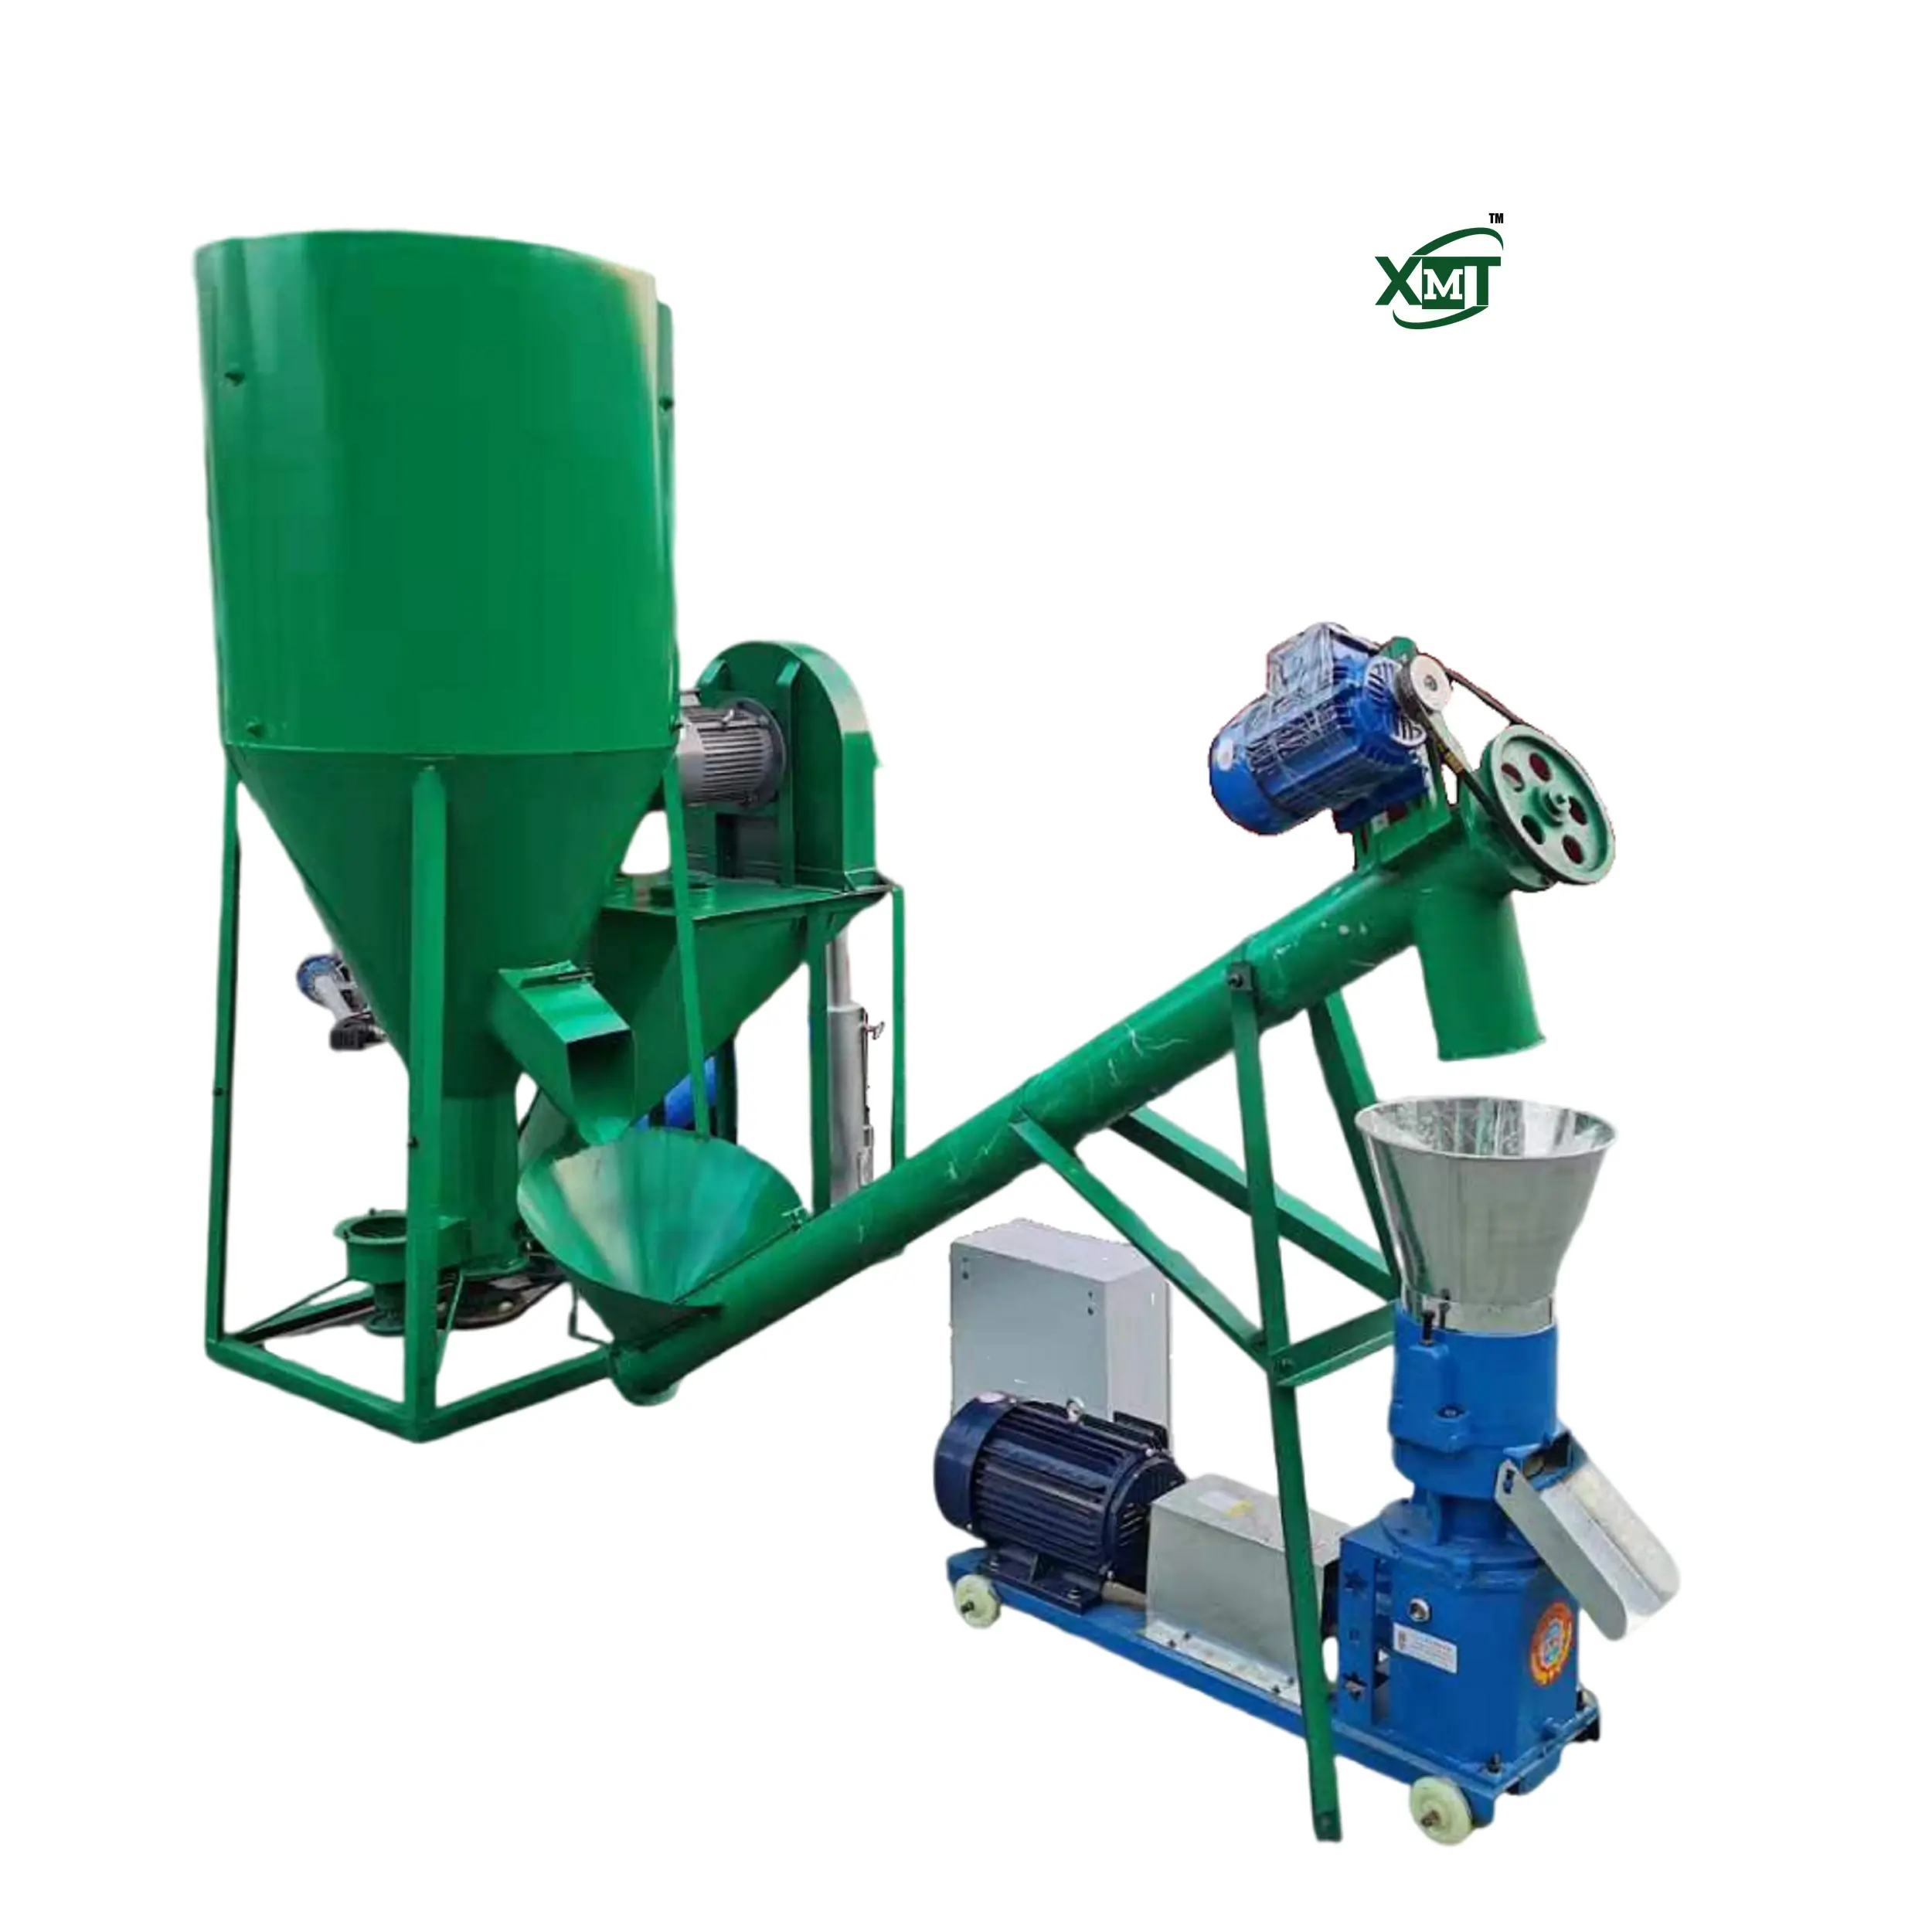 Grinder and mixer for animal feed corn sheep livestock grinding mill machine animal feed mixer machine